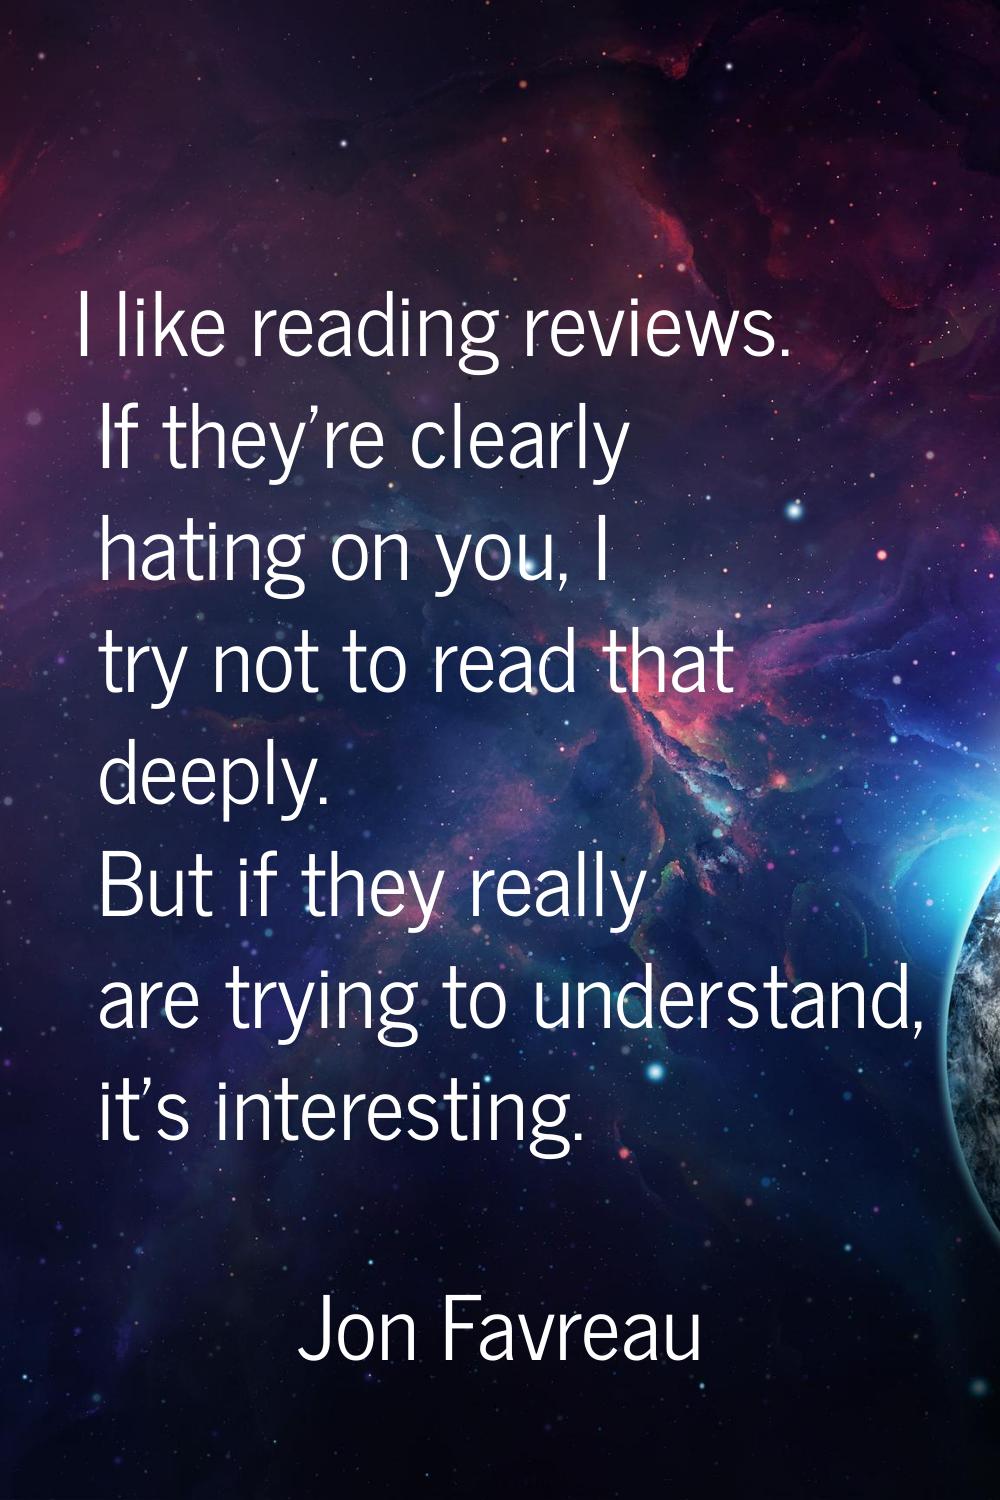 I like reading reviews. If they're clearly hating on you, I try not to read that deeply. But if the